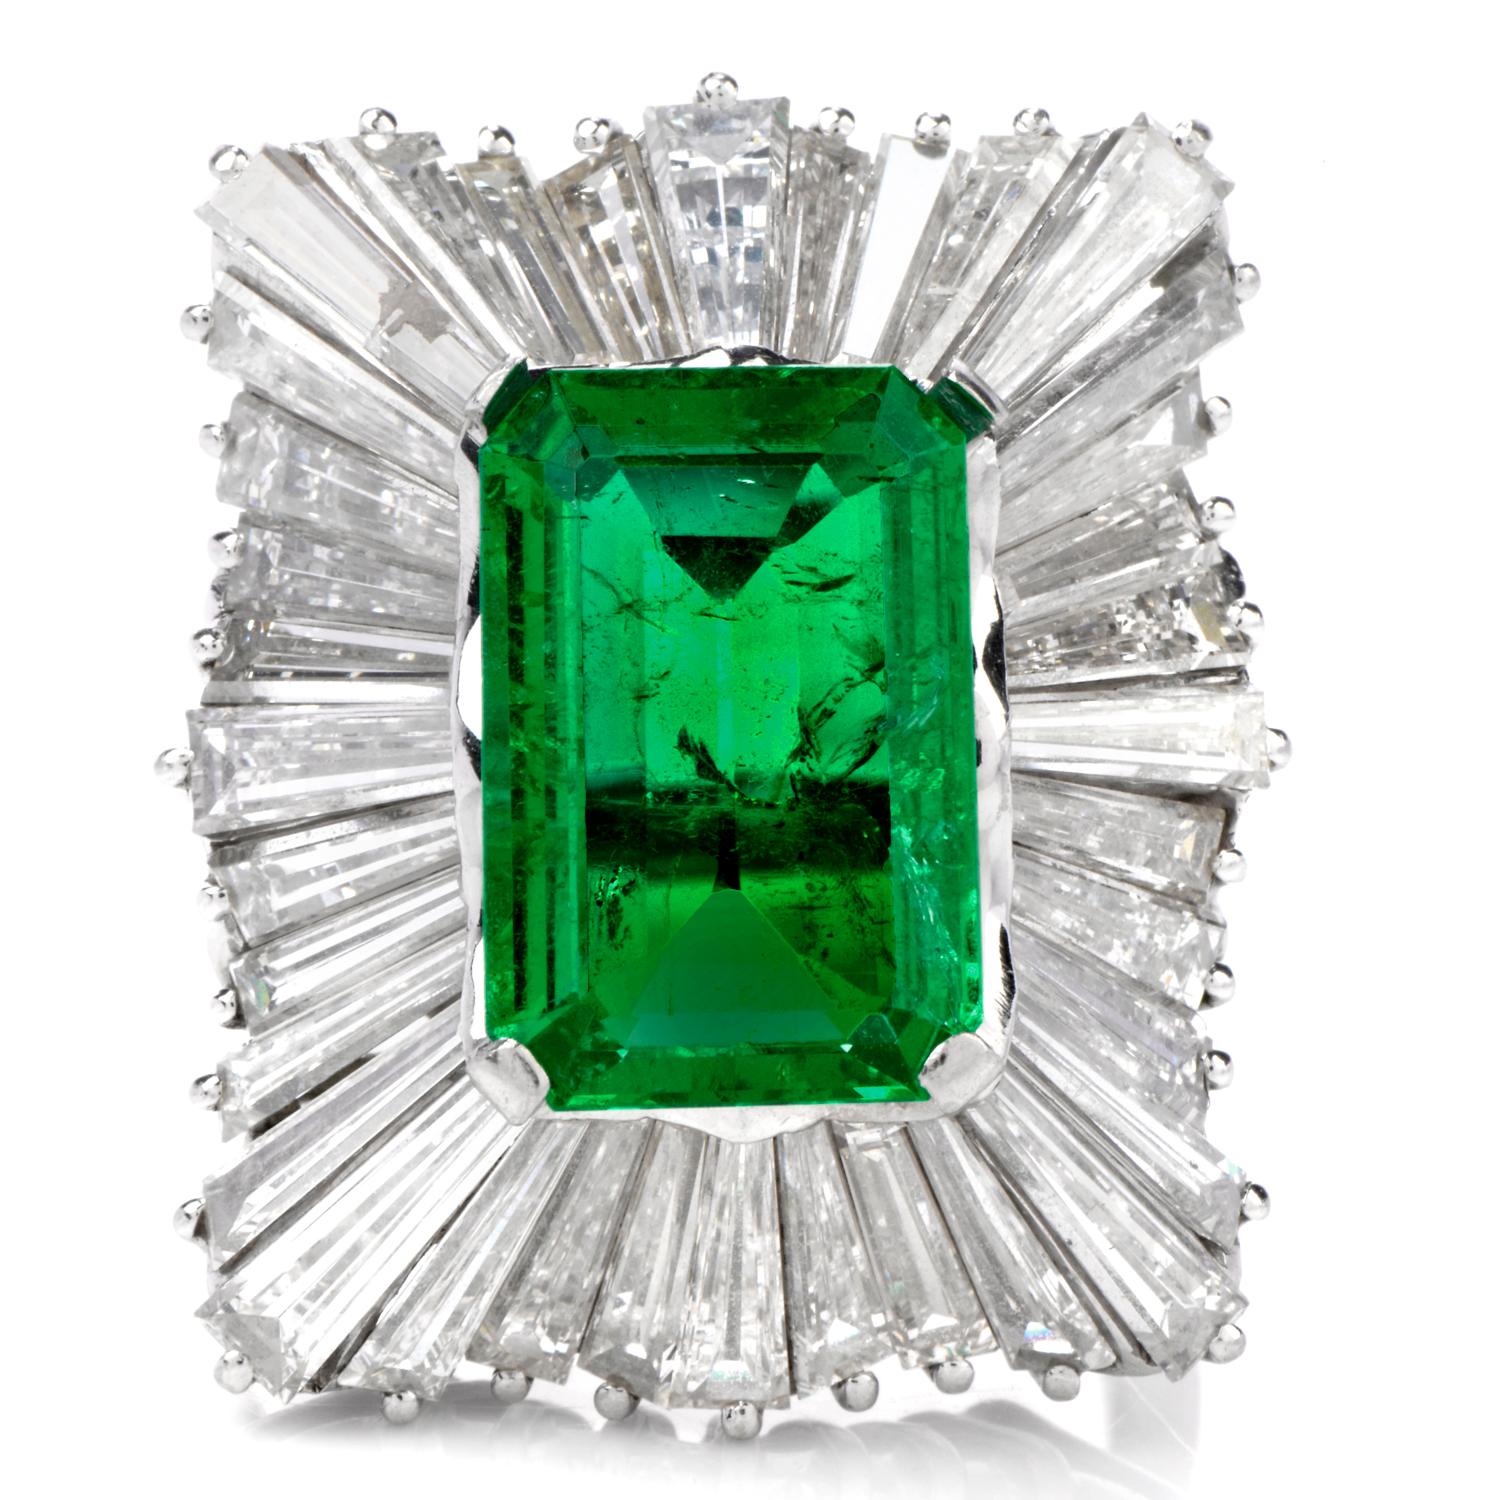 This Vibrant and Stately Diamond and GIA Certified Colombian Emerald cocktail

ring was inspired in a Ballerina design and crafted in 

17.3  grams of luxurious Platinum.  

Centered is 4.92 carats genuine emerald  measuring

14.3mm x 9.6mm x 4.53mm